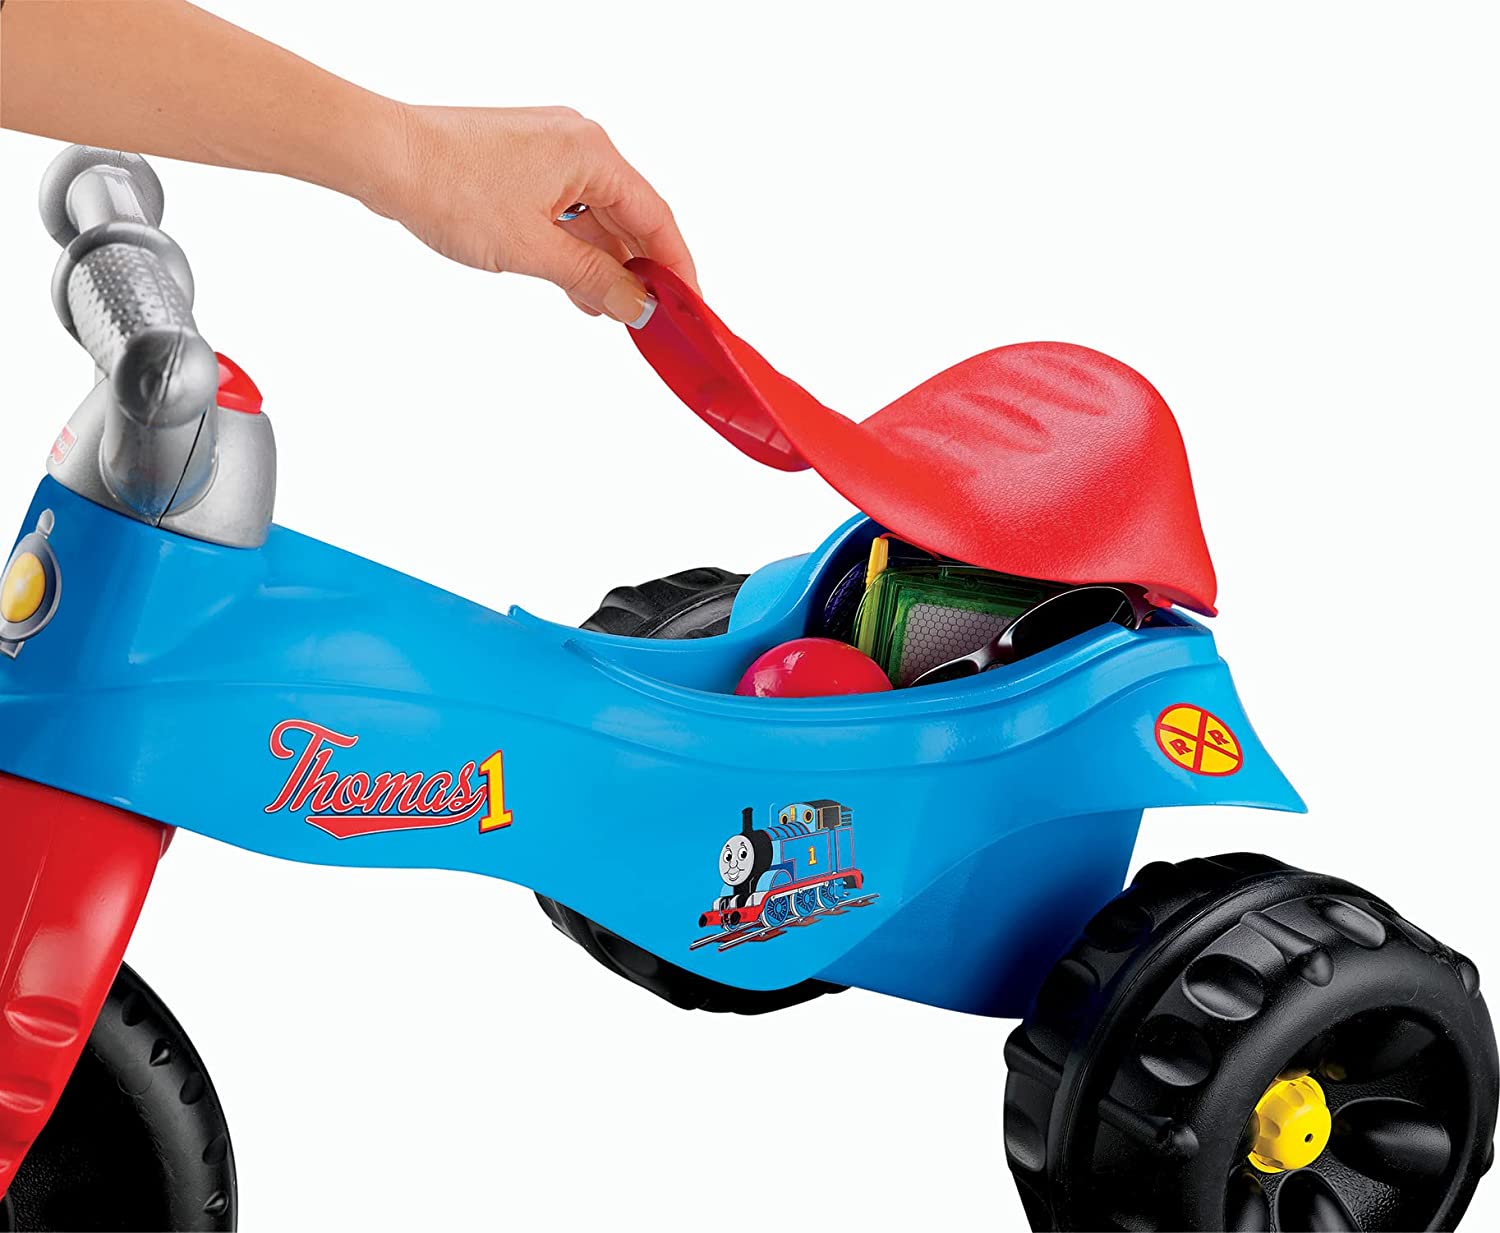 Fisher-Price Thomas and Friends Tough Trike - with Rugged Treads For "Off-Road" Fun